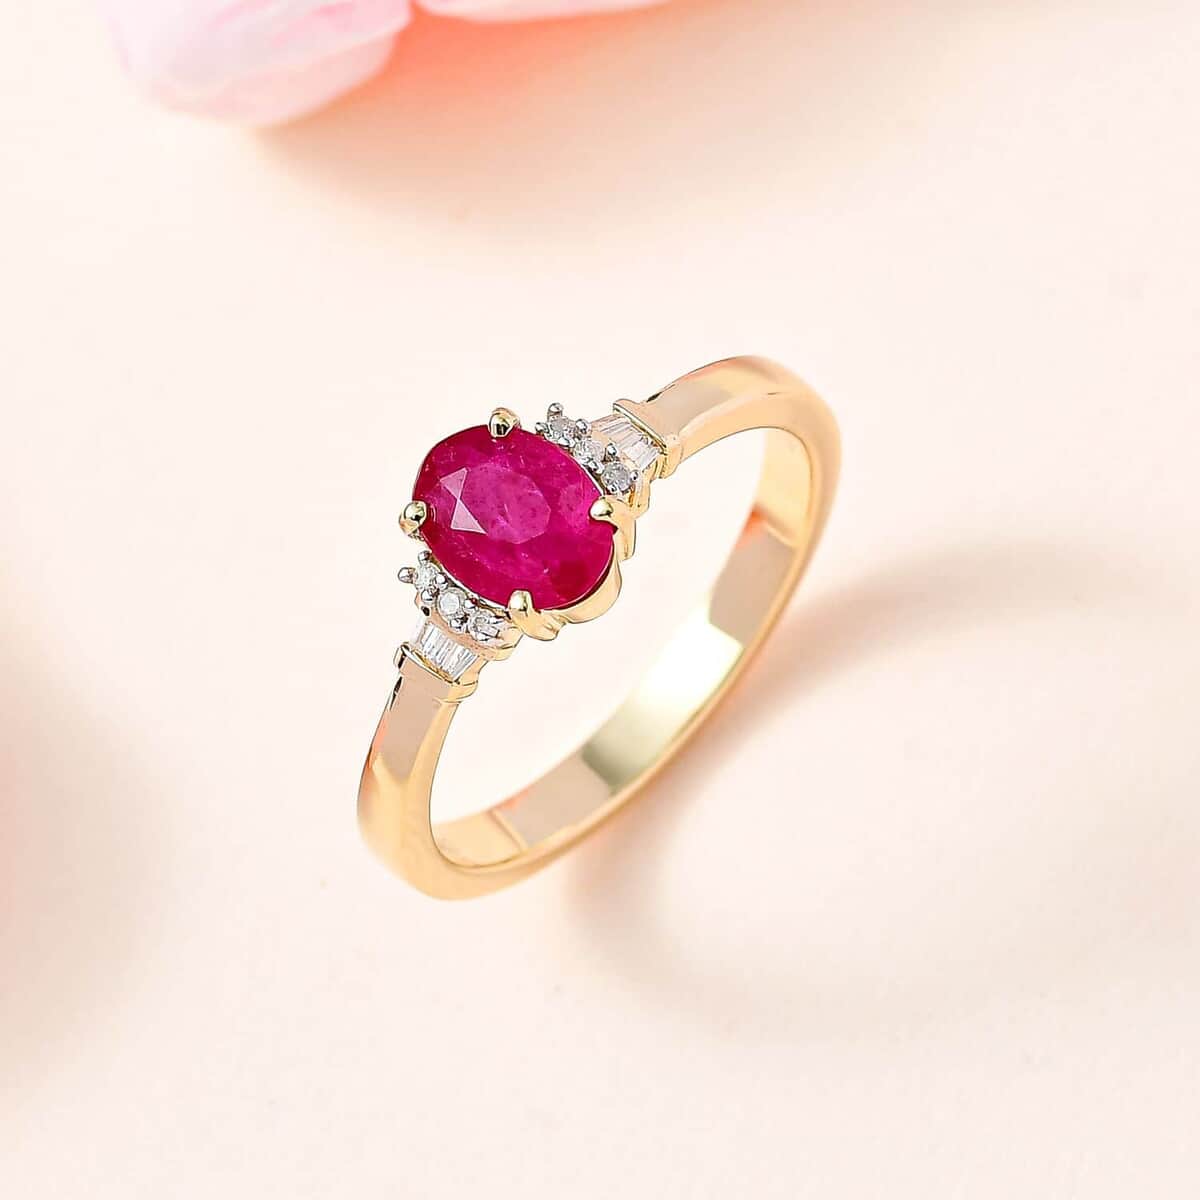 Luxoro 10K Yellow Gold Premium Mozambique Ruby and G-H I3 Diamond Ring 4.25 Grams 1.60 ctw (Del. in 7-10 Days) image number 1